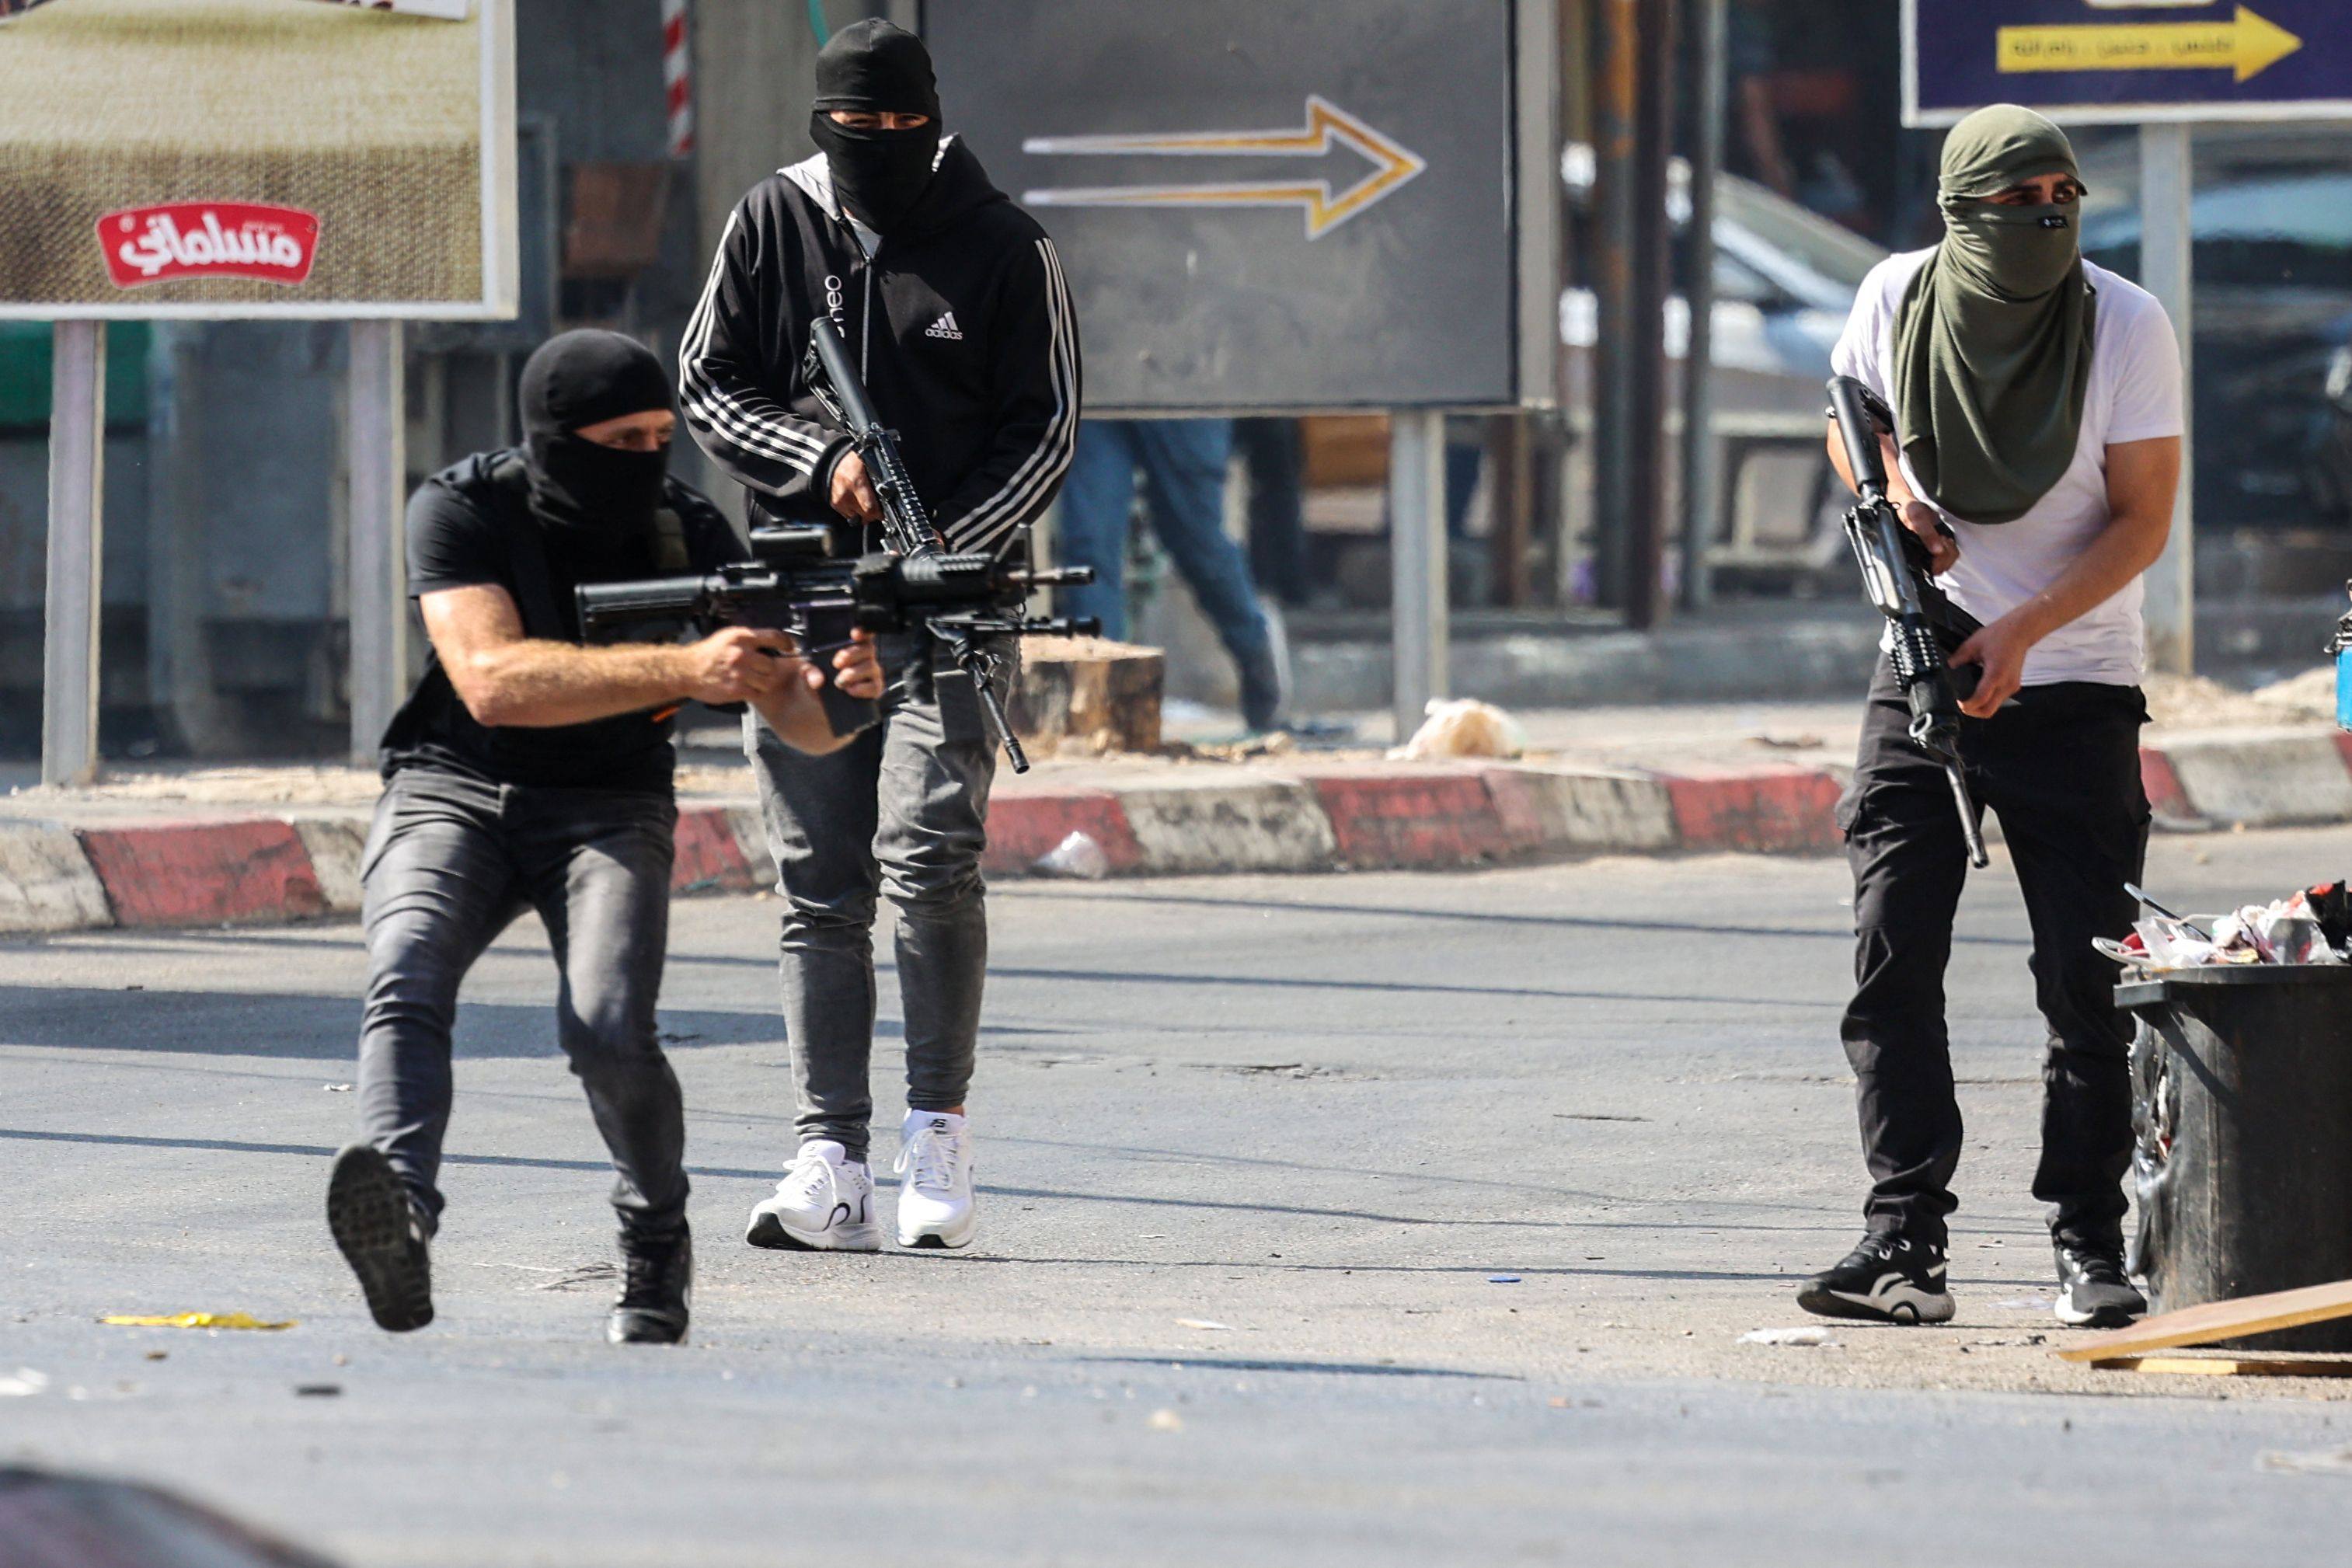 Palestinian militants take up position during a confrontation with Israeli army in the occupied West Bank city of Jenin on Monday. Photo: AFP